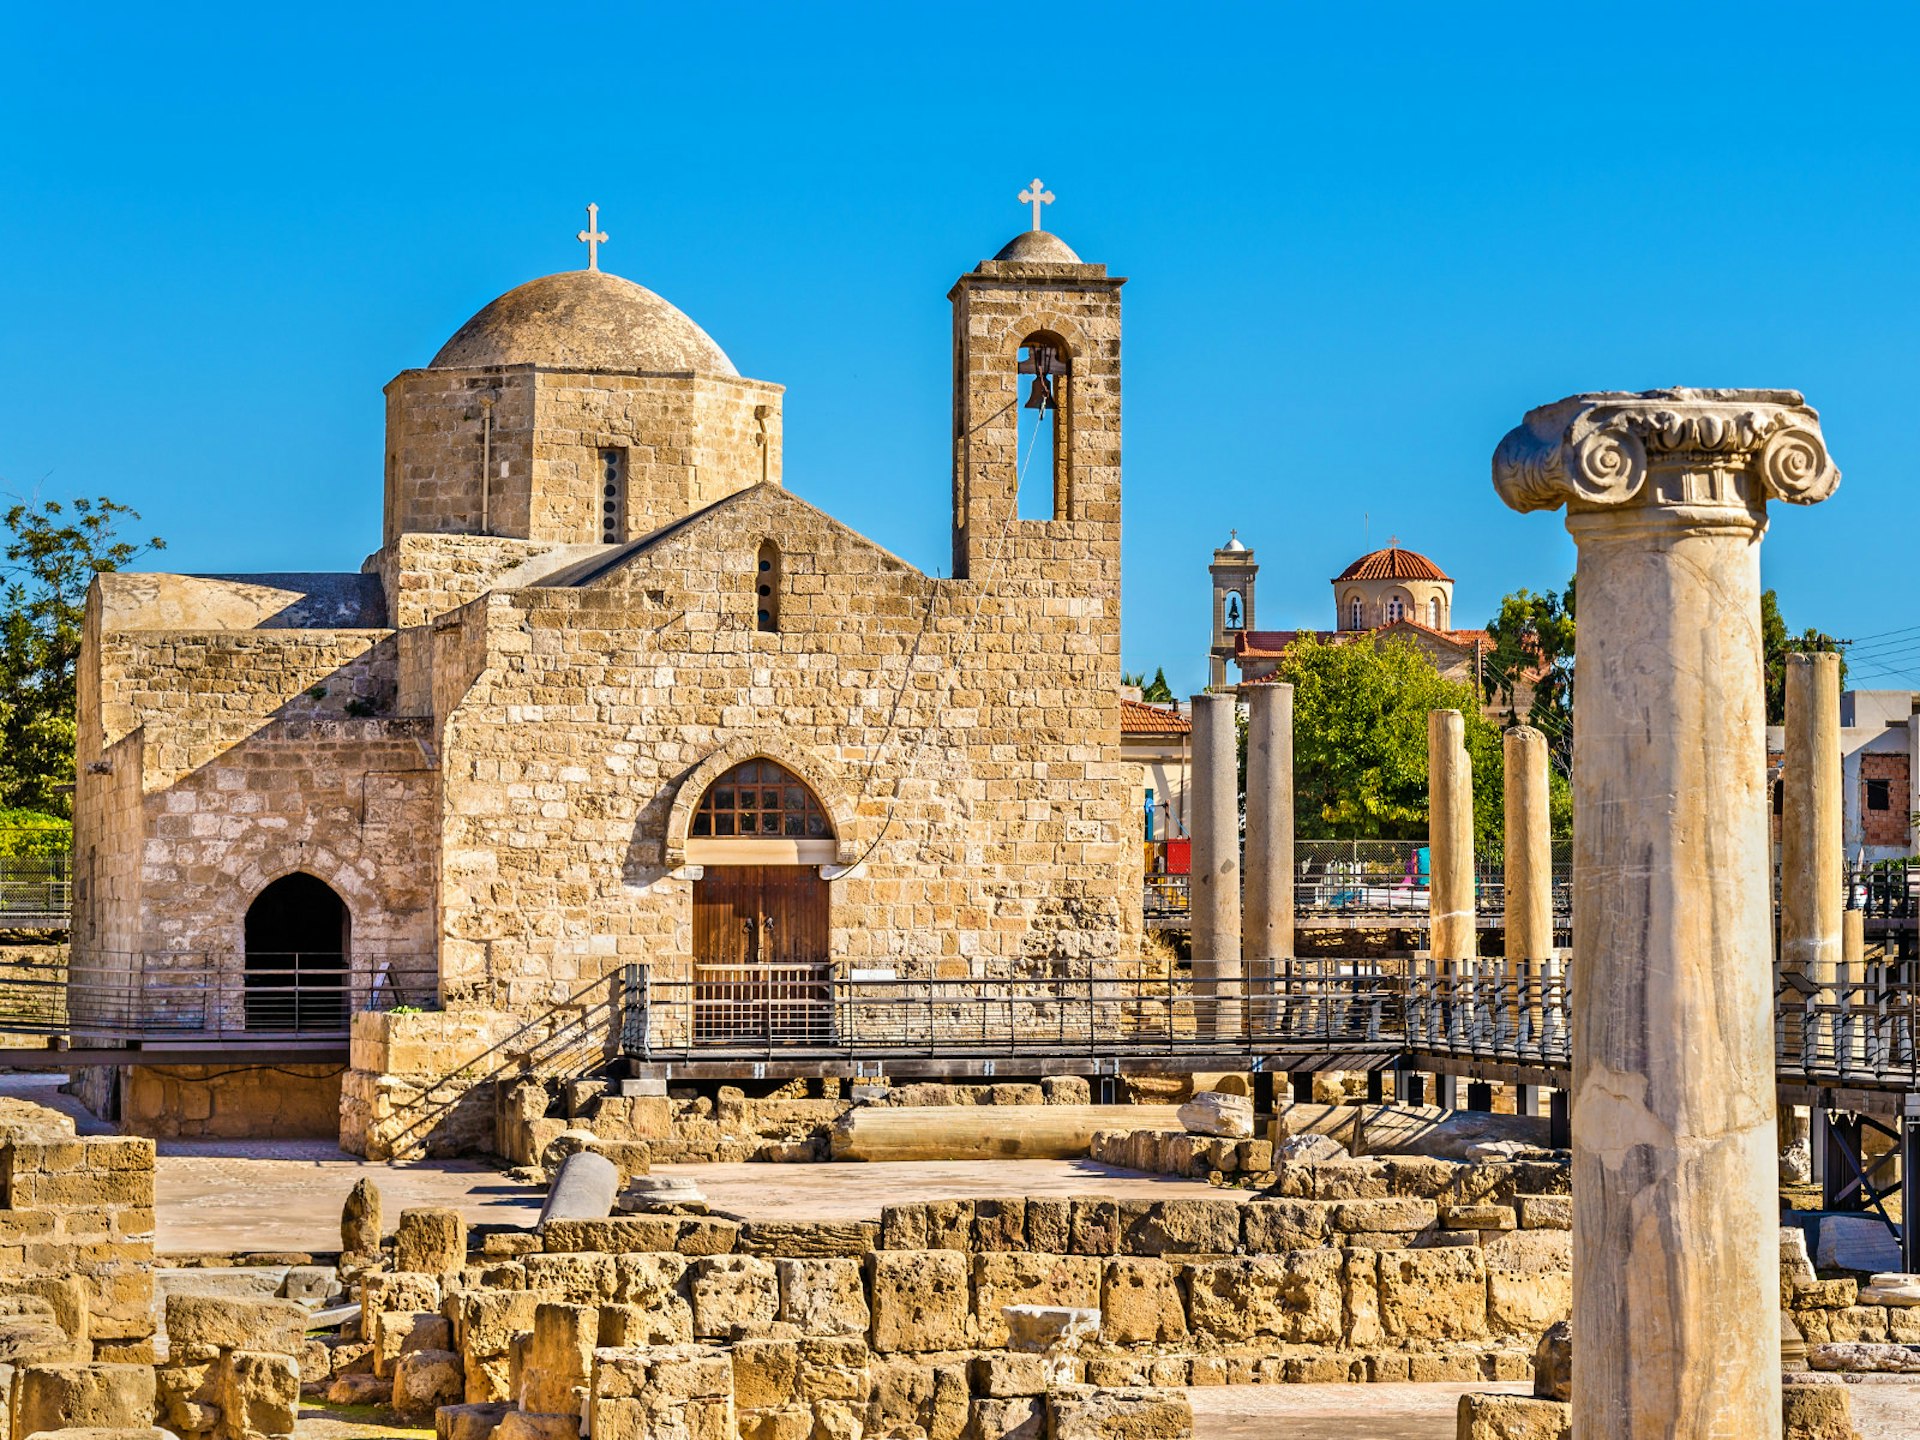 The remains of the Hrysopolitissa Basilica in Pafos © Leonid Andronov / Shutterstock